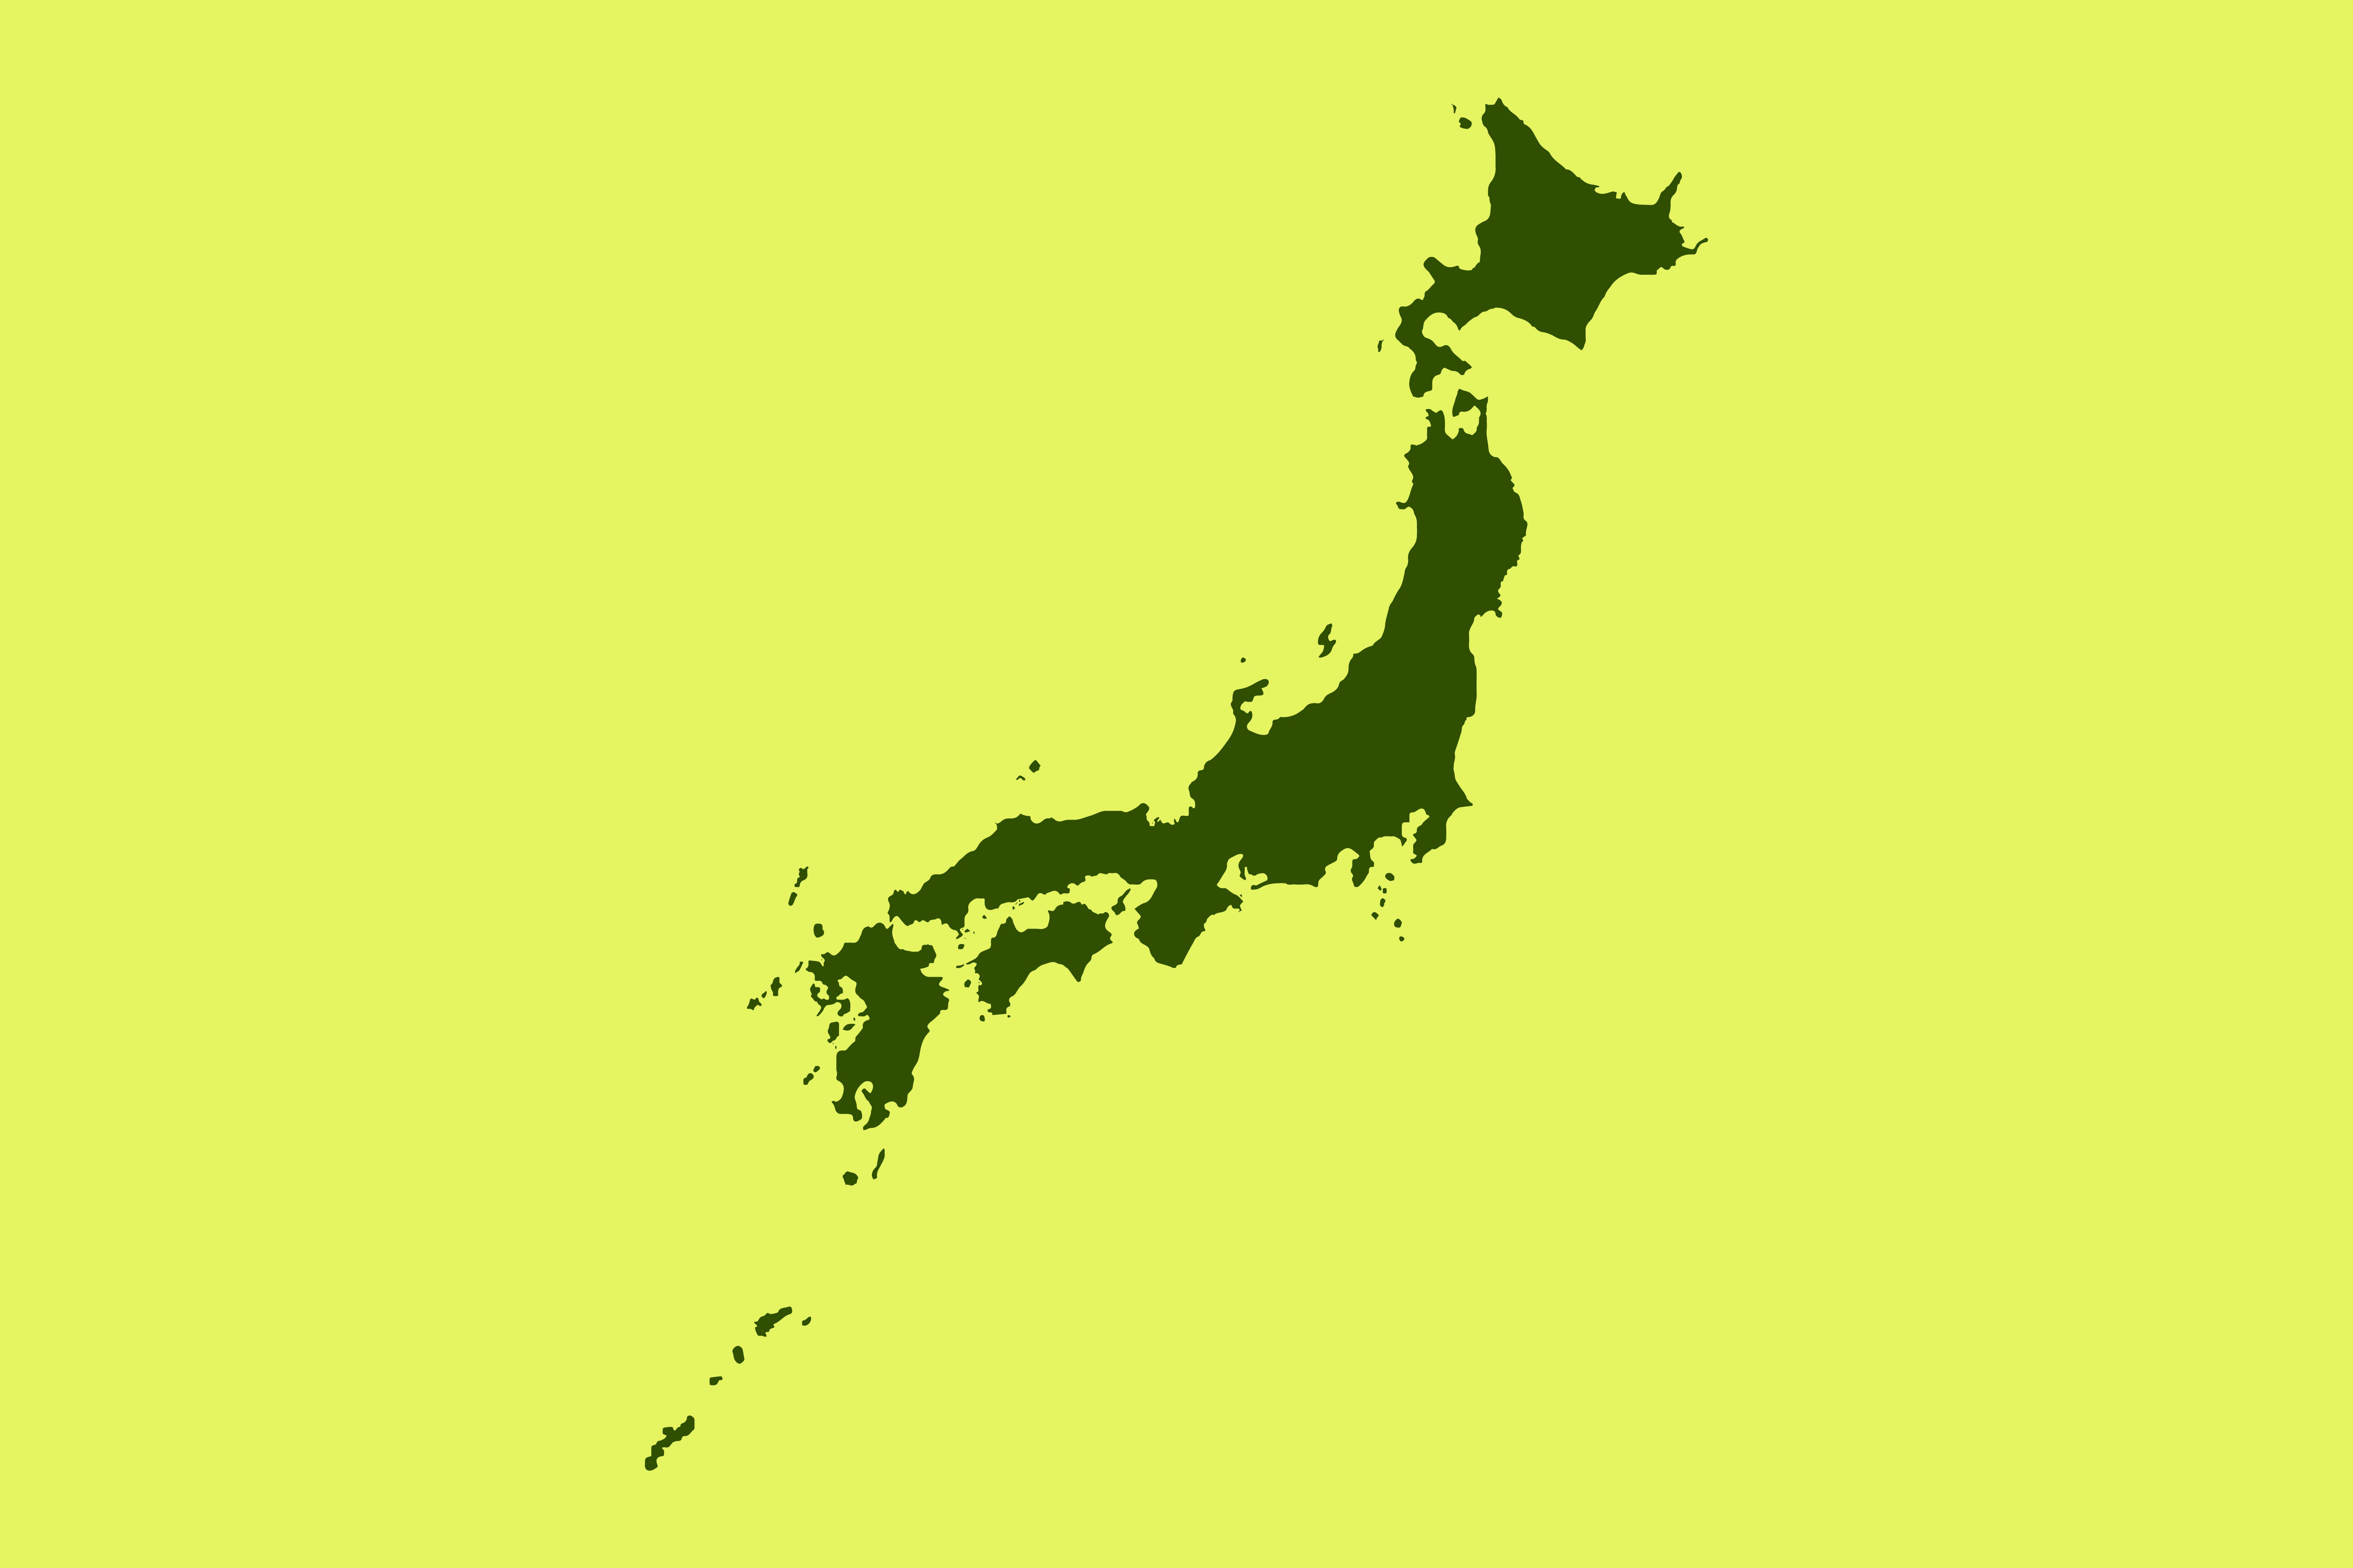 Japan Outline Graphic